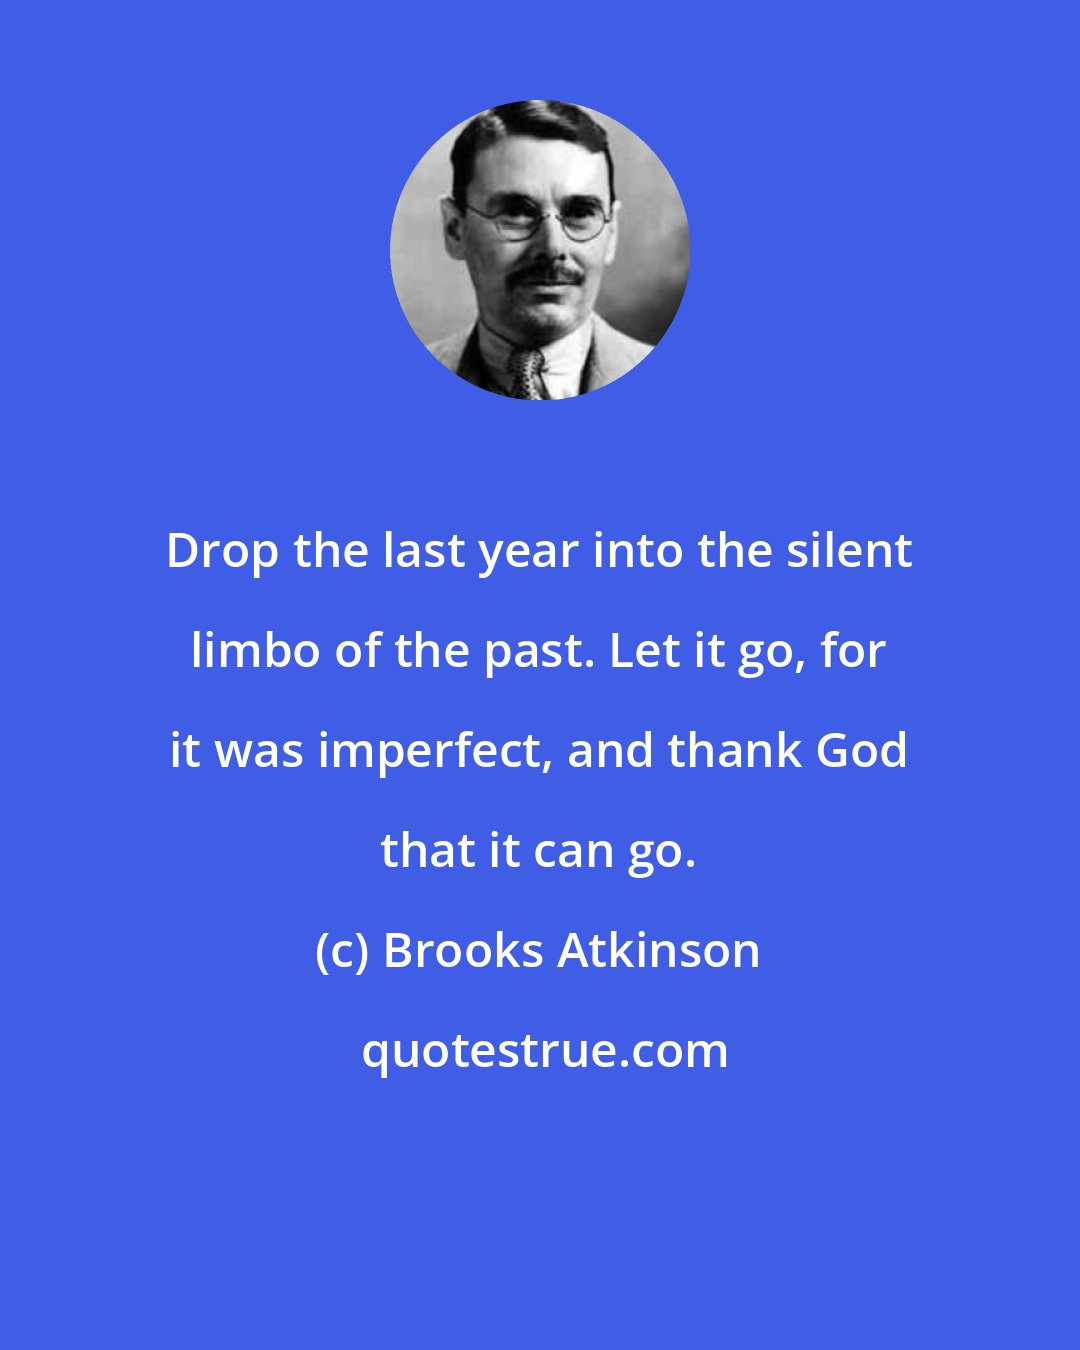 Brooks Atkinson: Drop the last year into the silent limbo of the past. Let it go, for it was imperfect, and thank God that it can go.